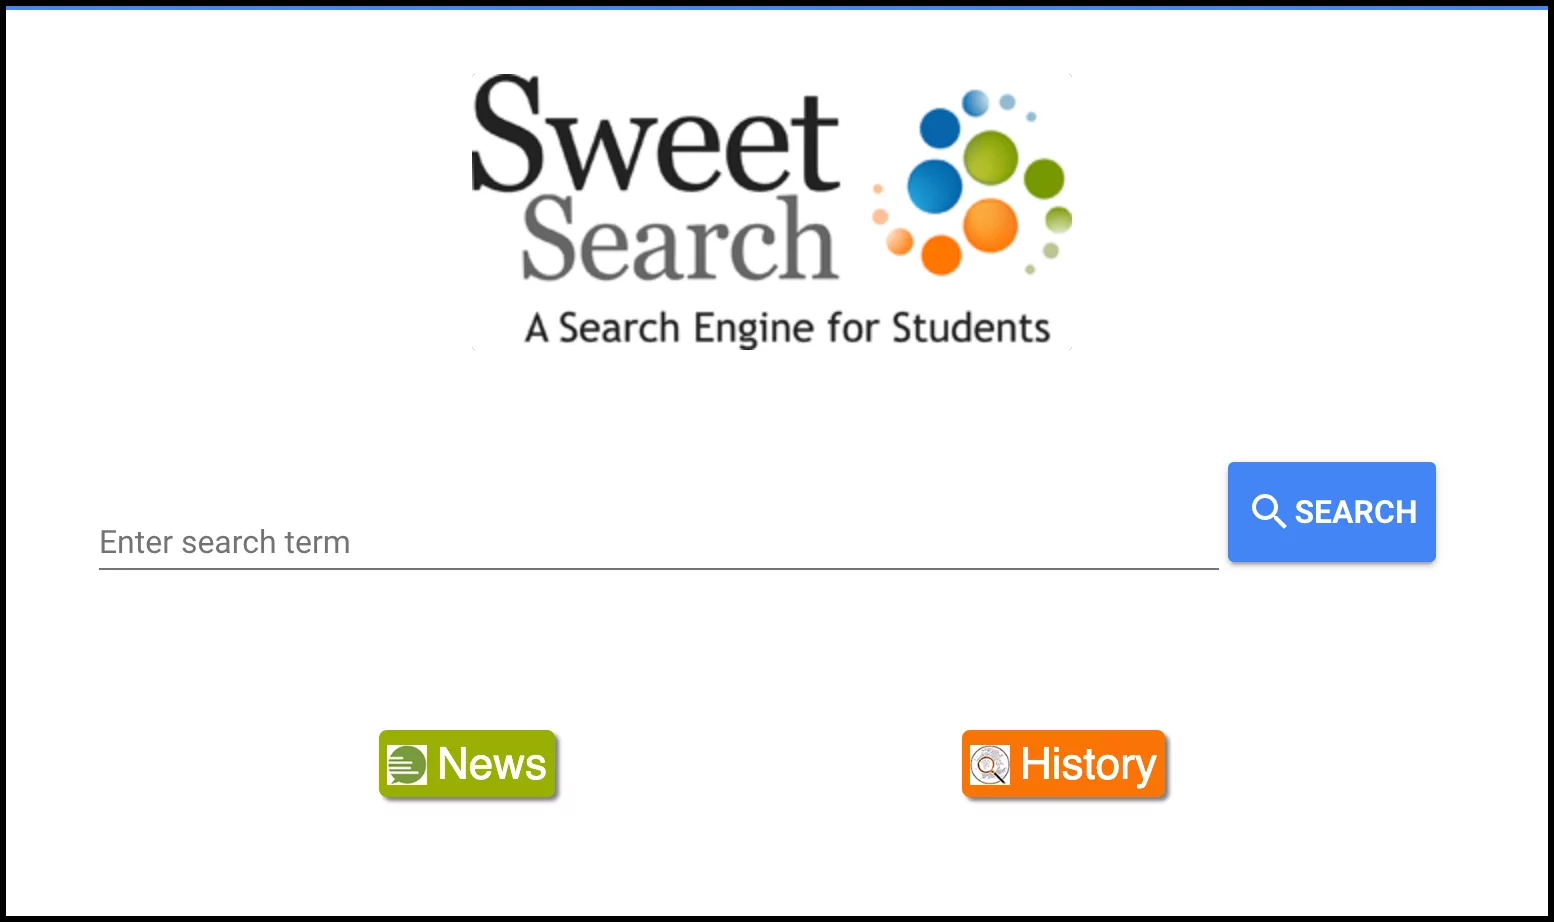 Safe  Kids Search Engines